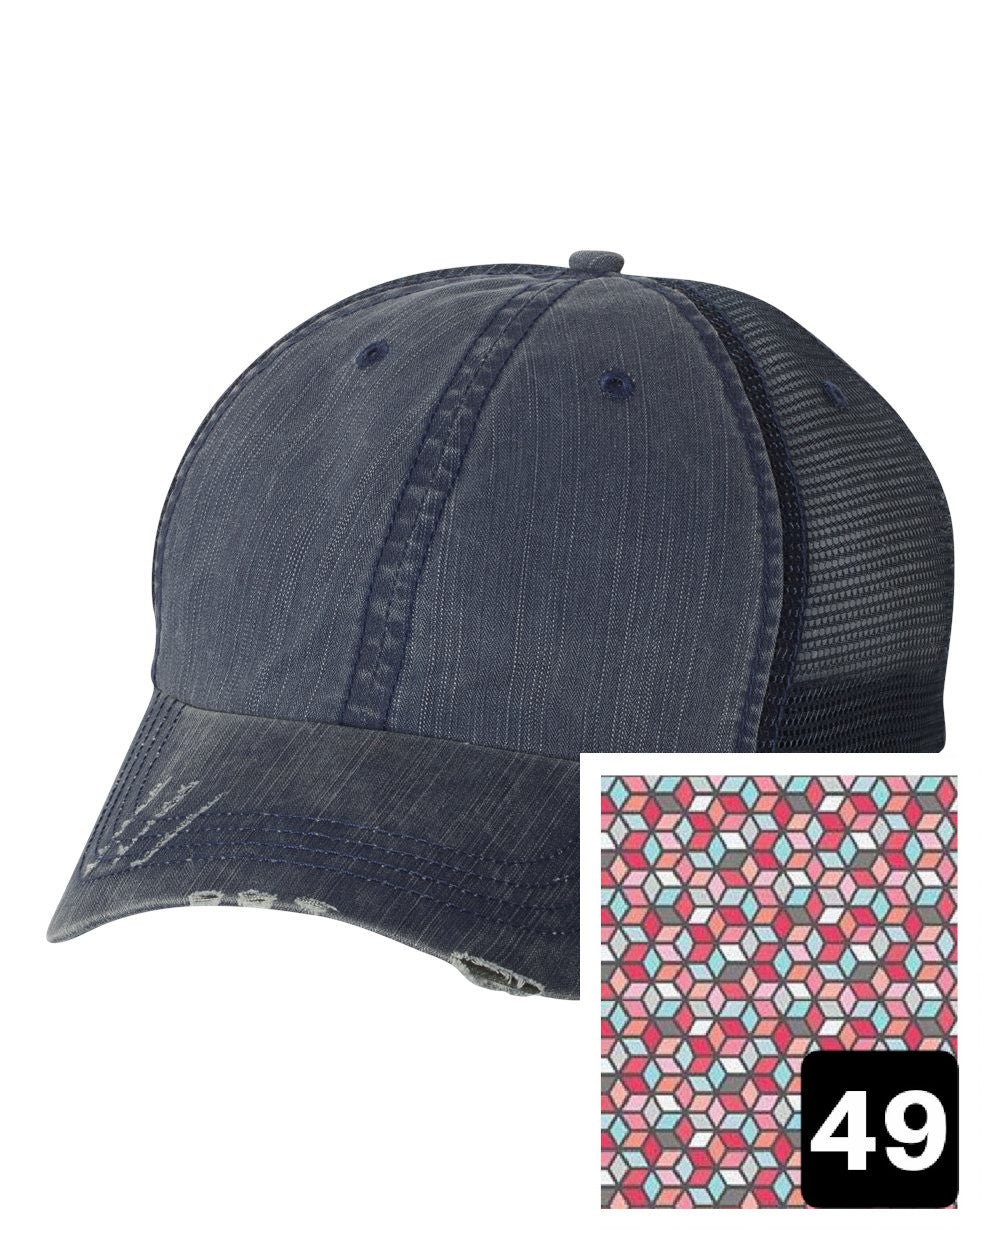 New Mexico Hat | Navy Distressed Trucker Cap | Many Fabric Choices